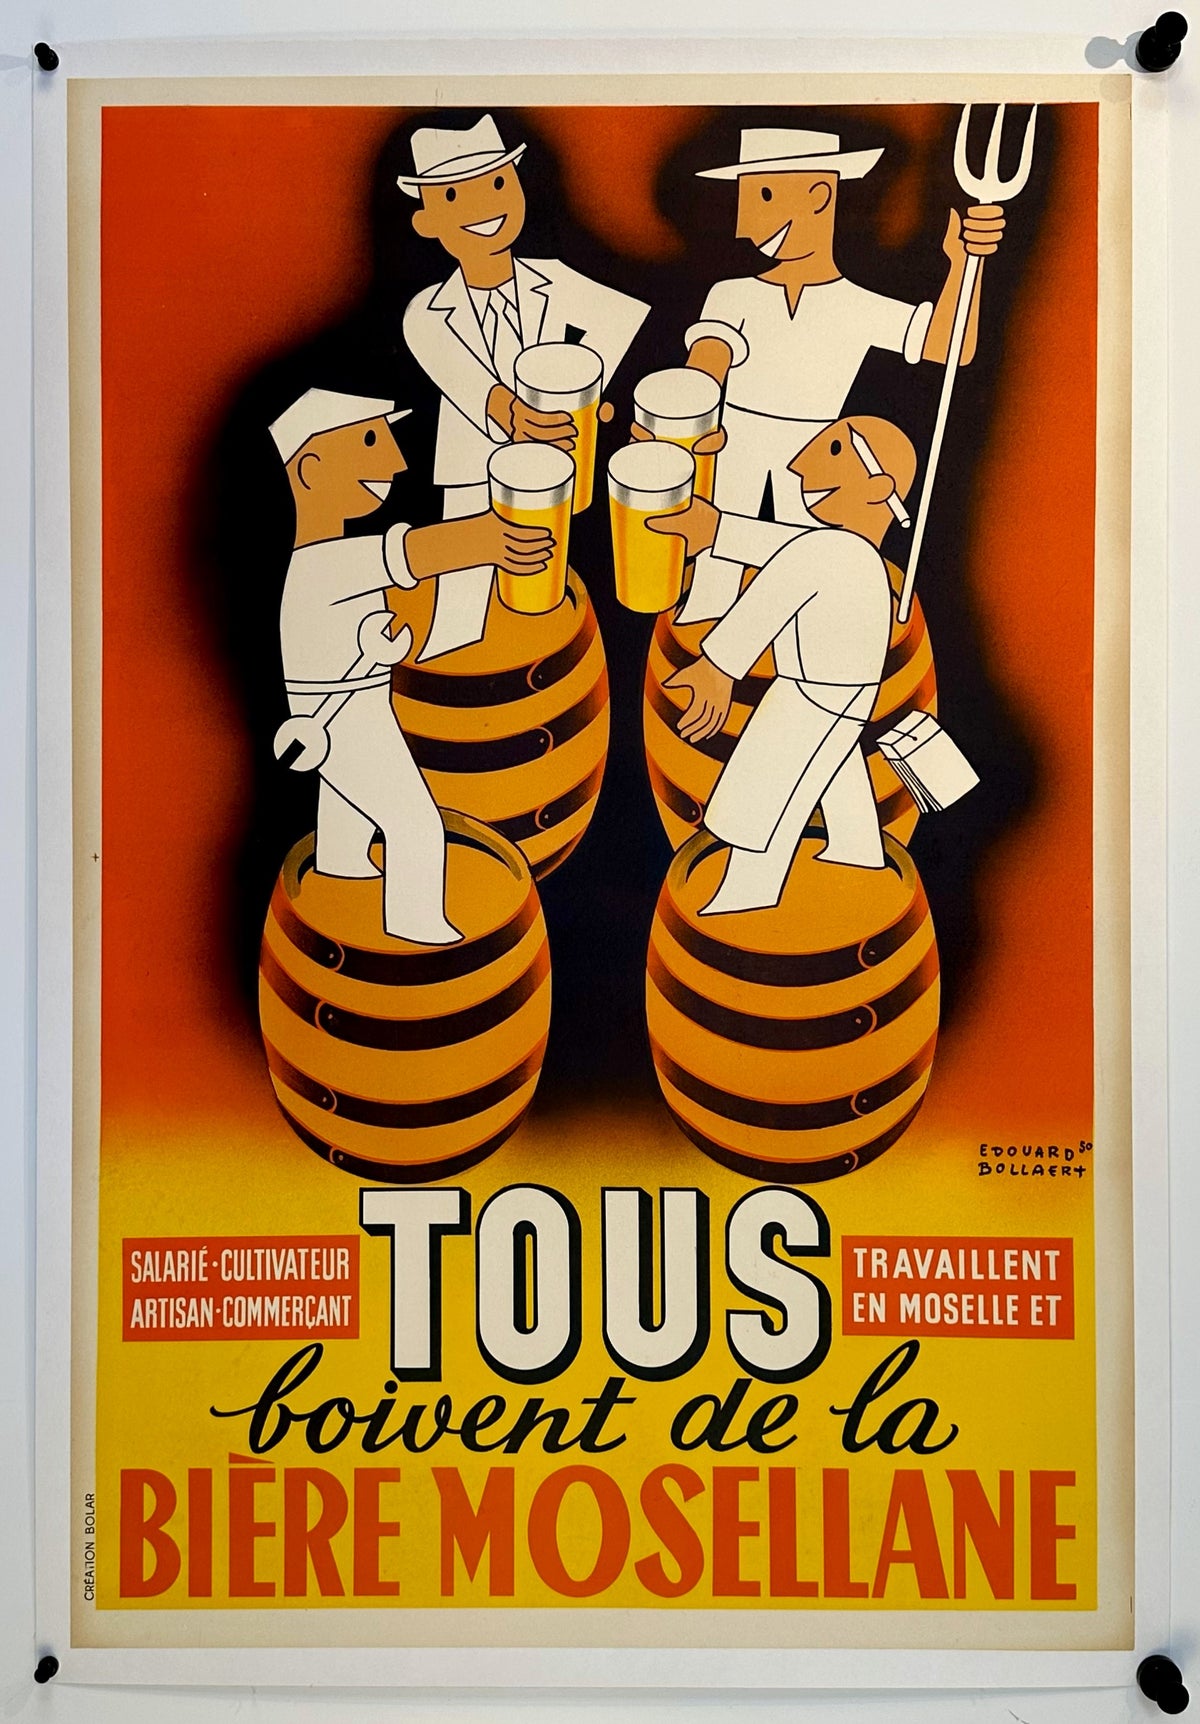 Biere Mosellane by Edouard Bollerat - Authentic Vintage Poster